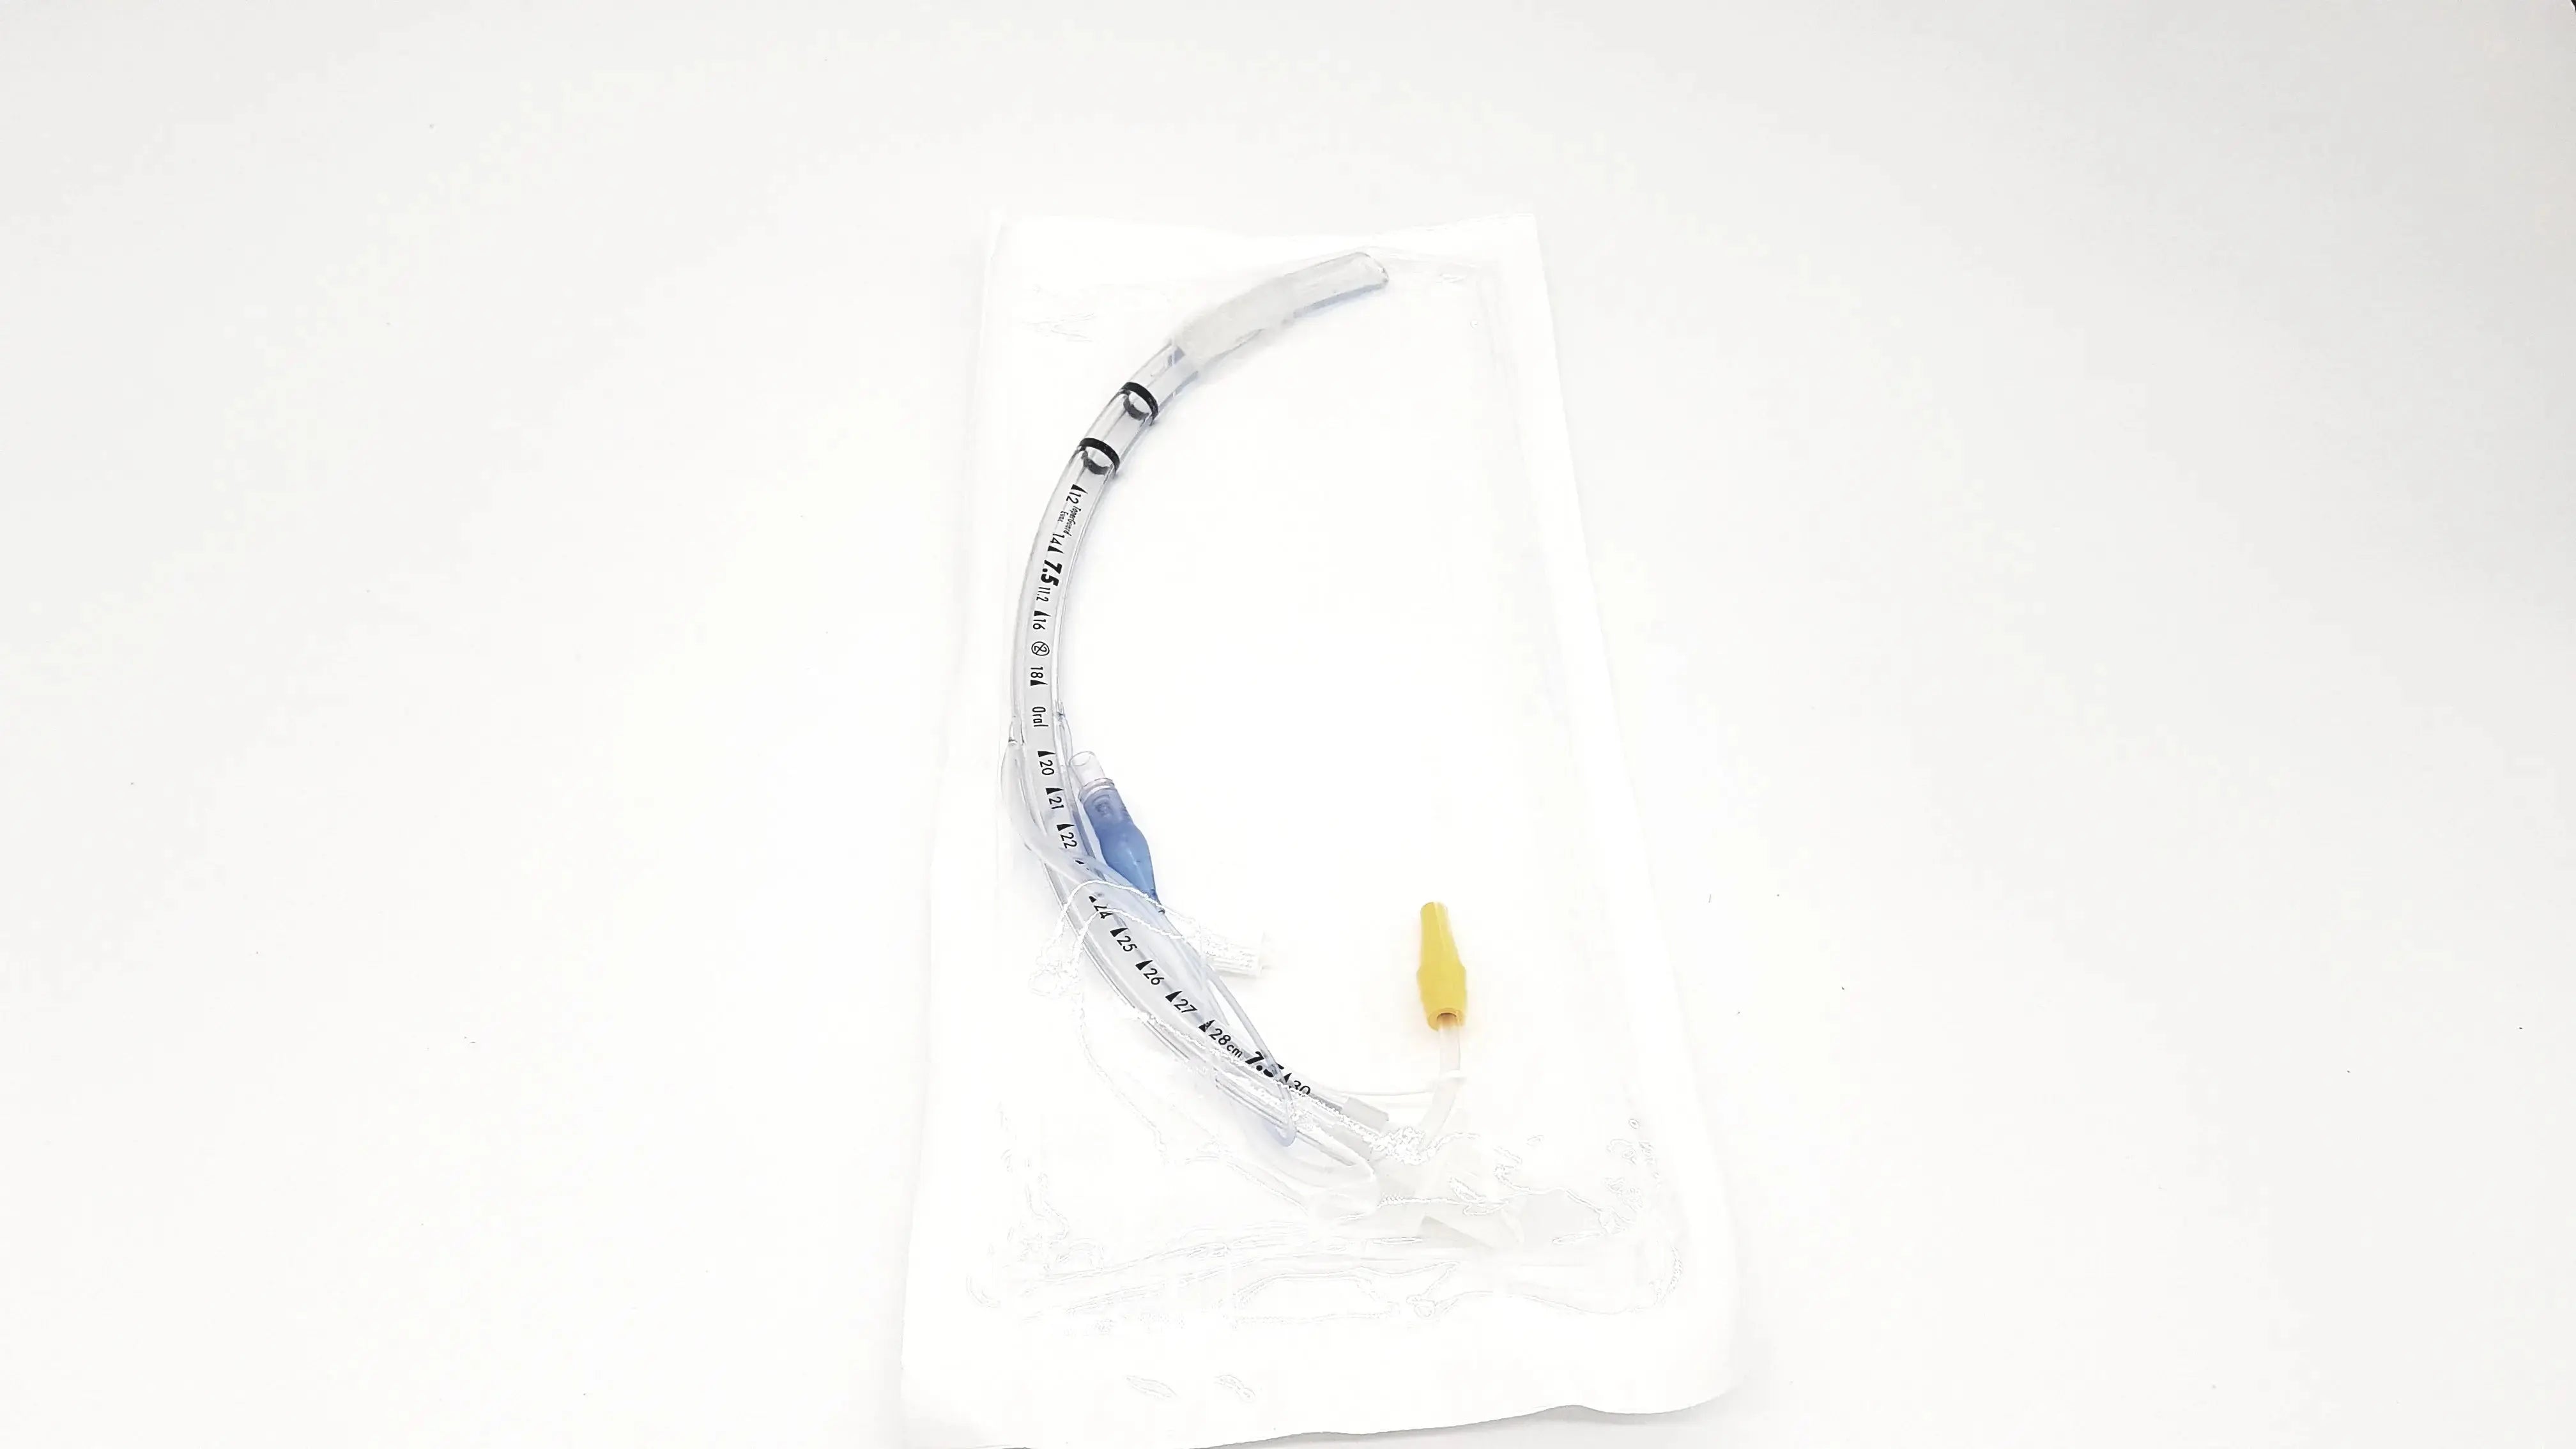 Load image into Gallery viewer, A Biomedical Service Covidien Shiley Evac TrachTubes with TaperGuard Cuff, 7.0 mm 1887 